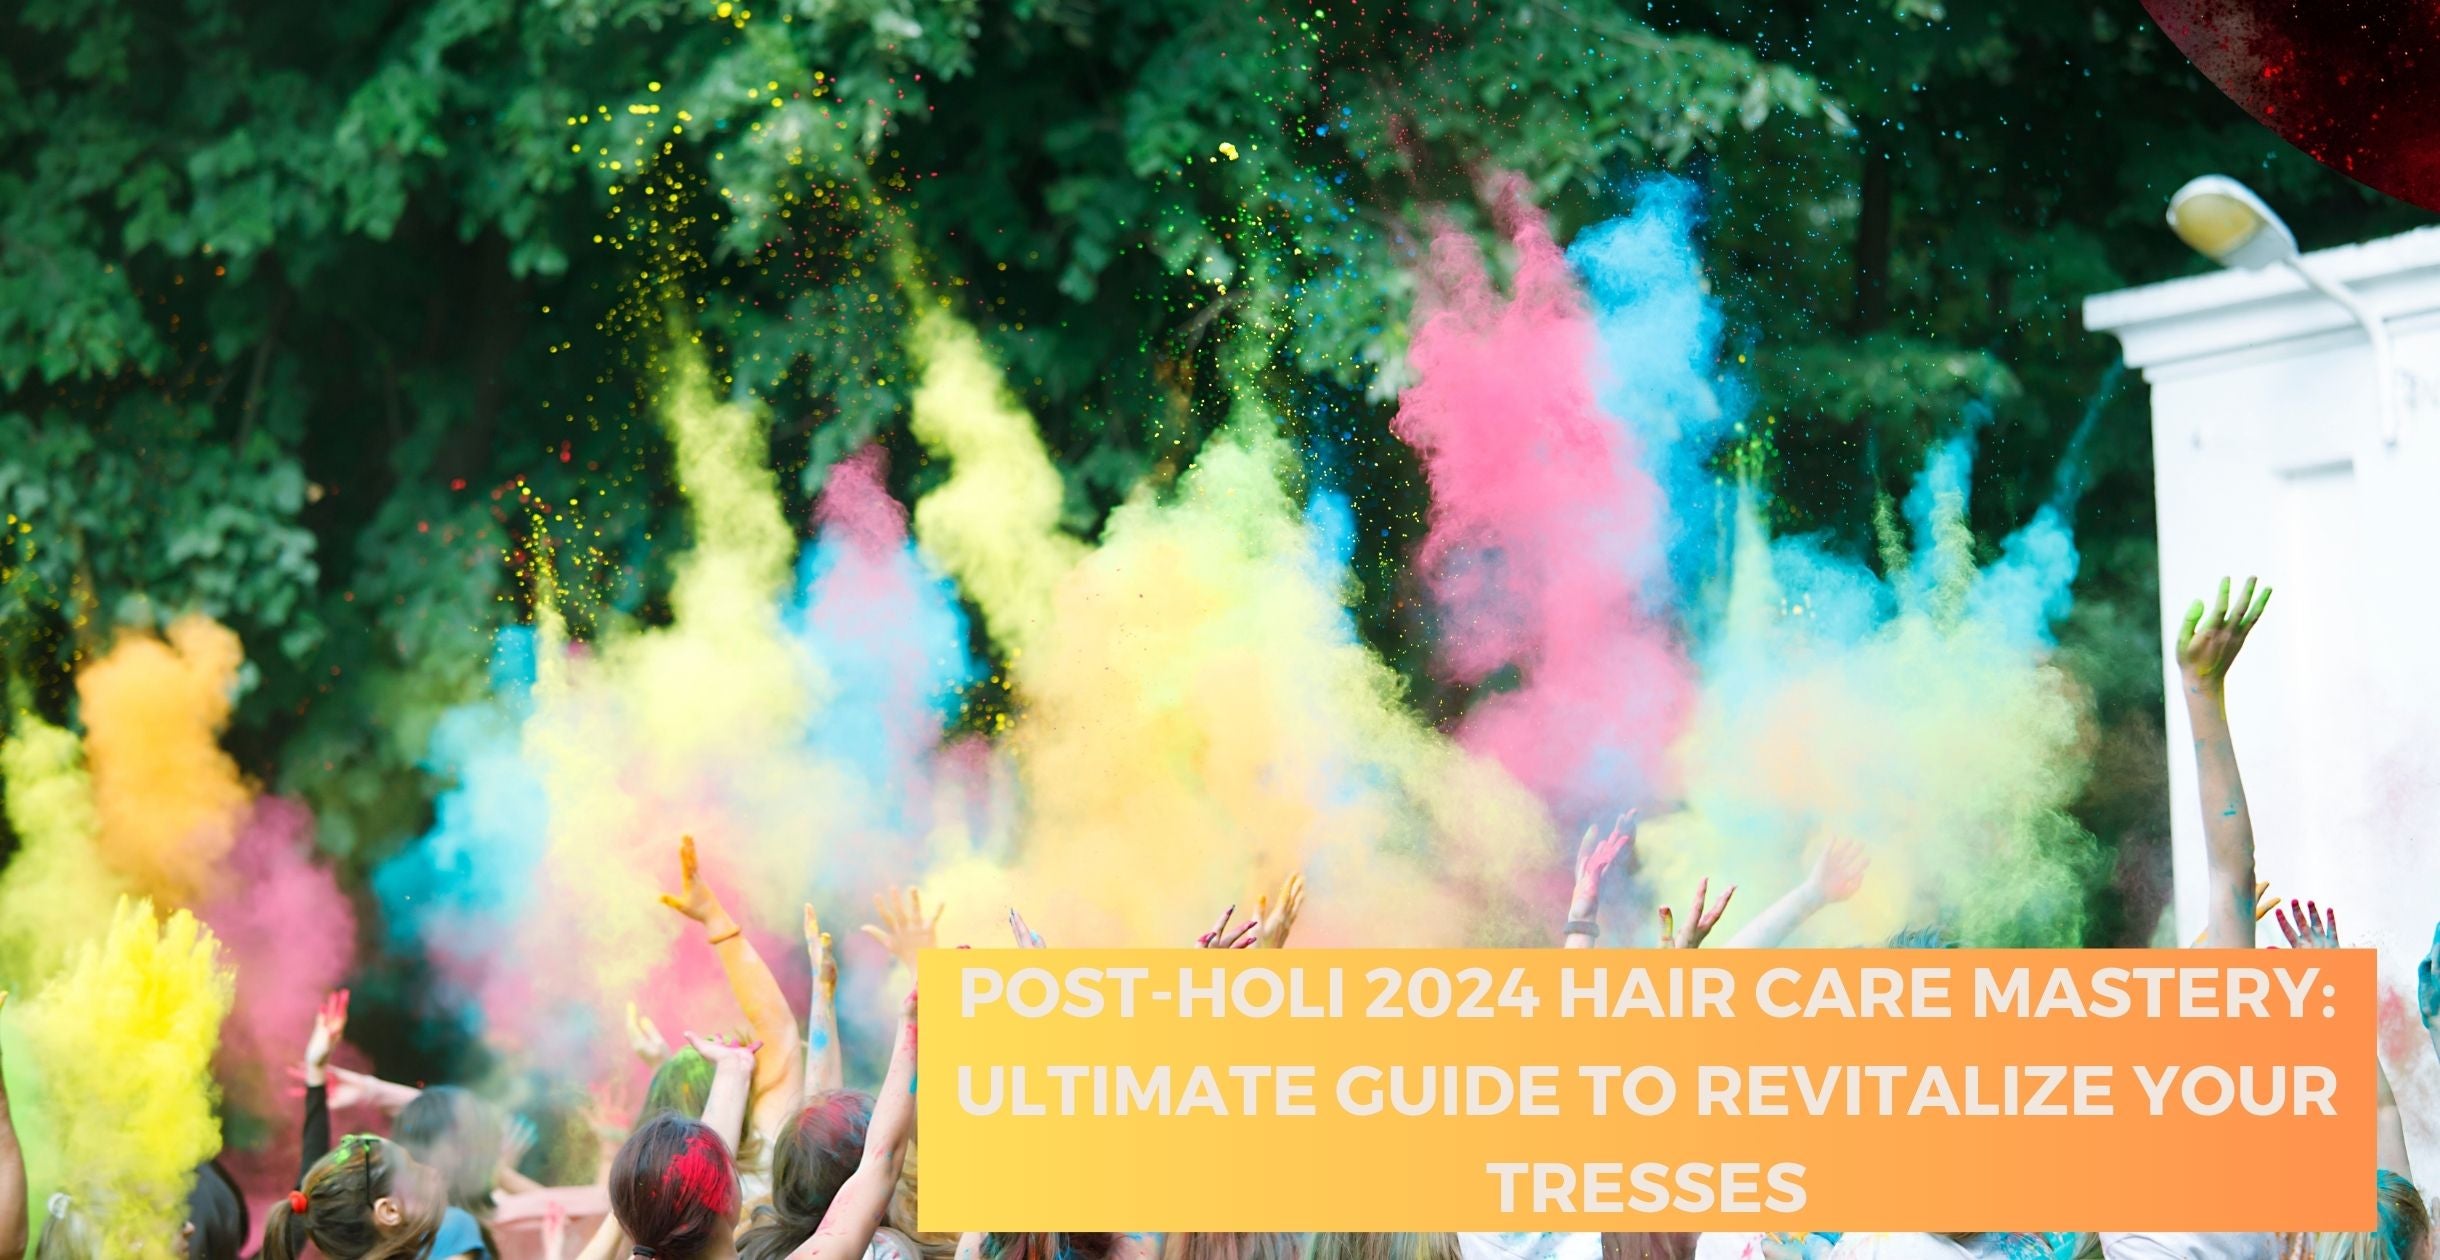 Post-Holi 2024 Hair Care Mastery: Ultimate Guide to Revitalize Your Tresses